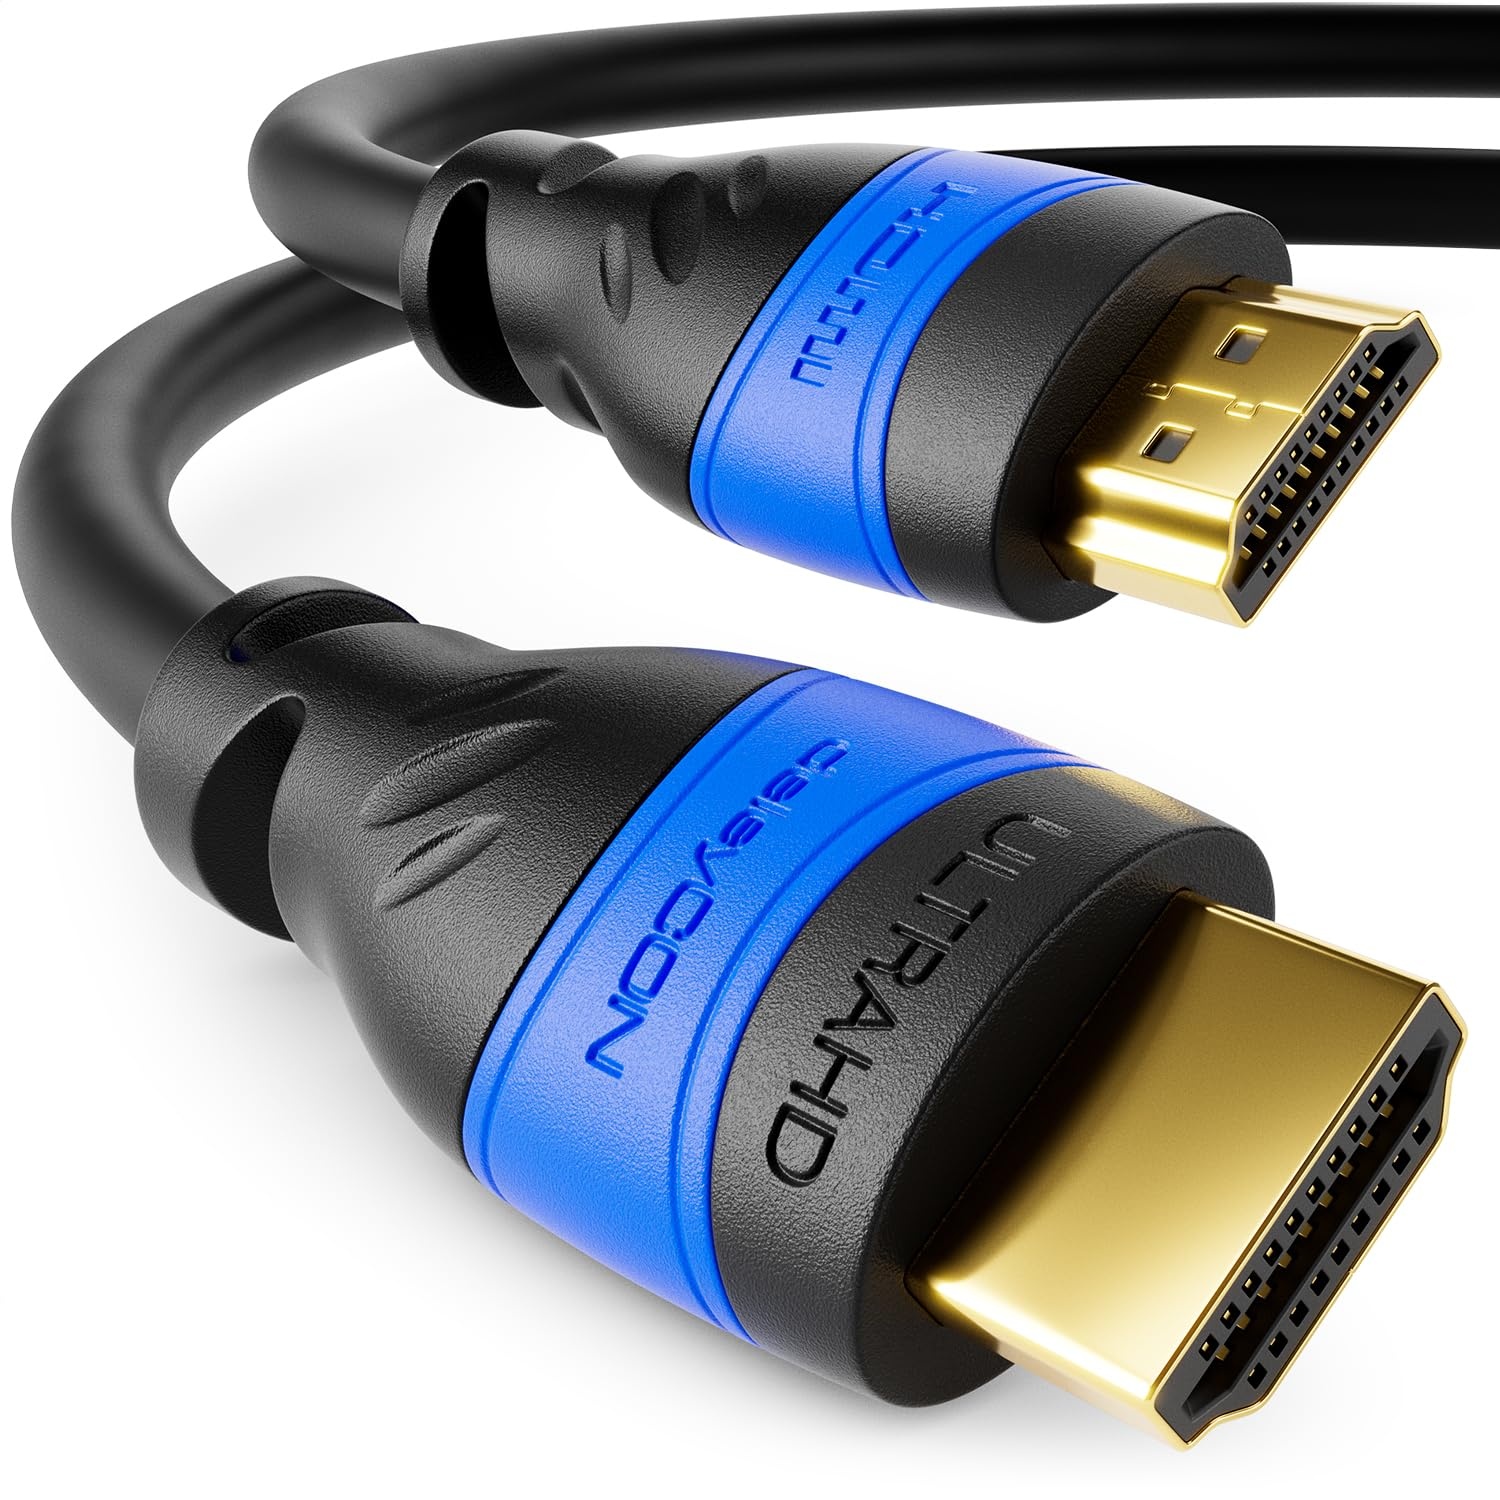 deleyCON 9m HDMI Kabel 2.0a/b - High Speed mit Ethernet - UHD 2160p 4K@60Hz 4:2:0 HDCP 2.2 ARC CEC Ethernet 18Gbps 3D Full HD 1080p Dolby - Schwarz